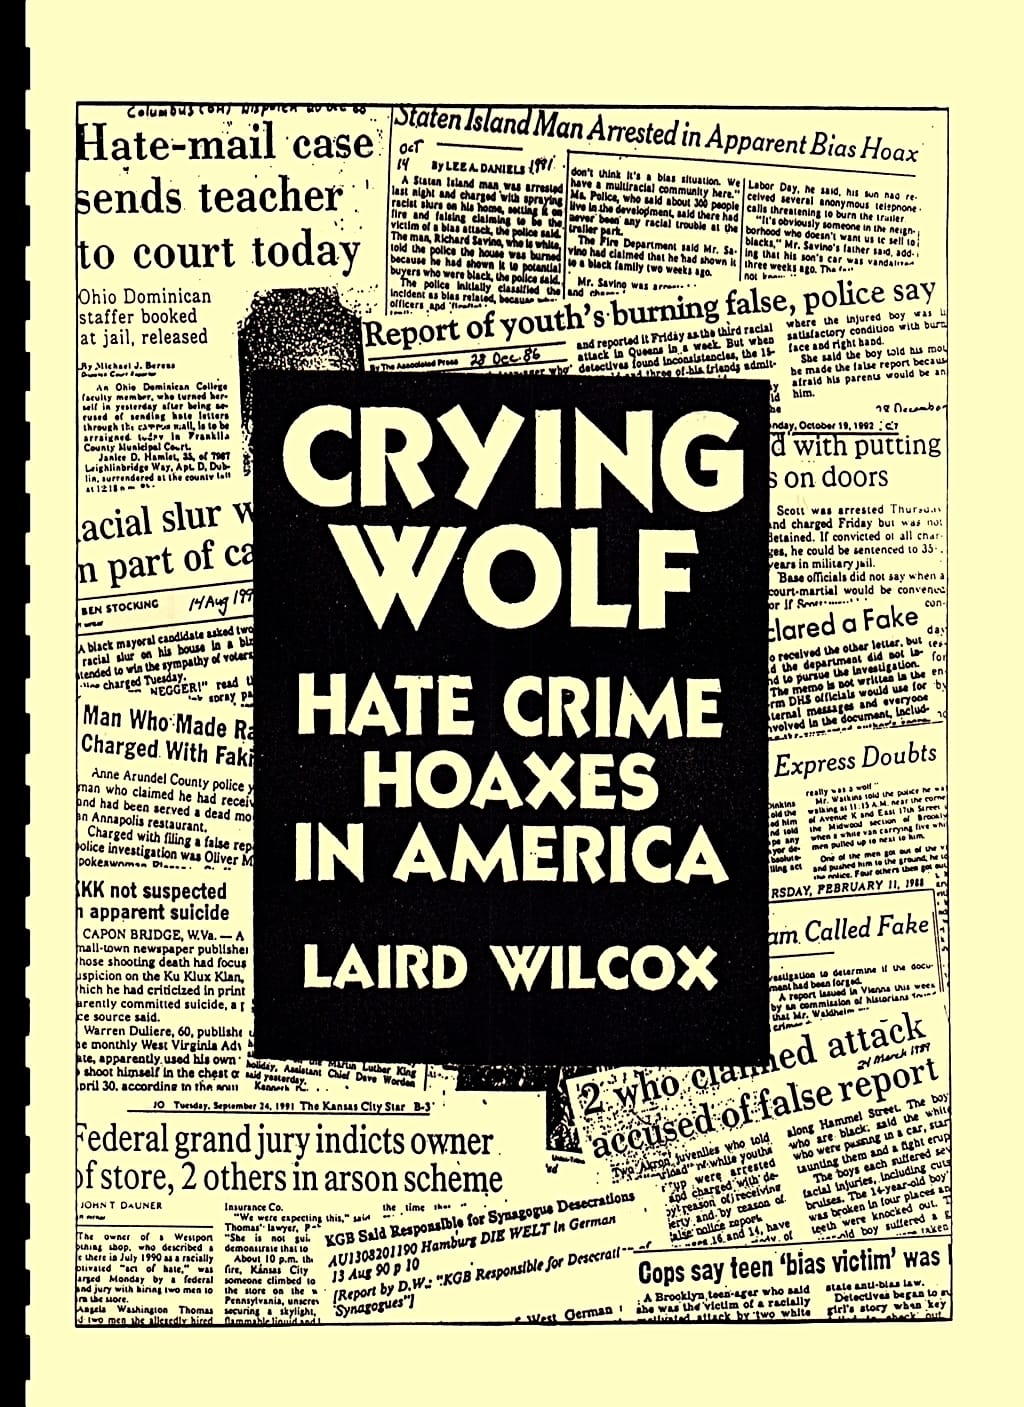 Crying Wolf, by Laird Wilcox